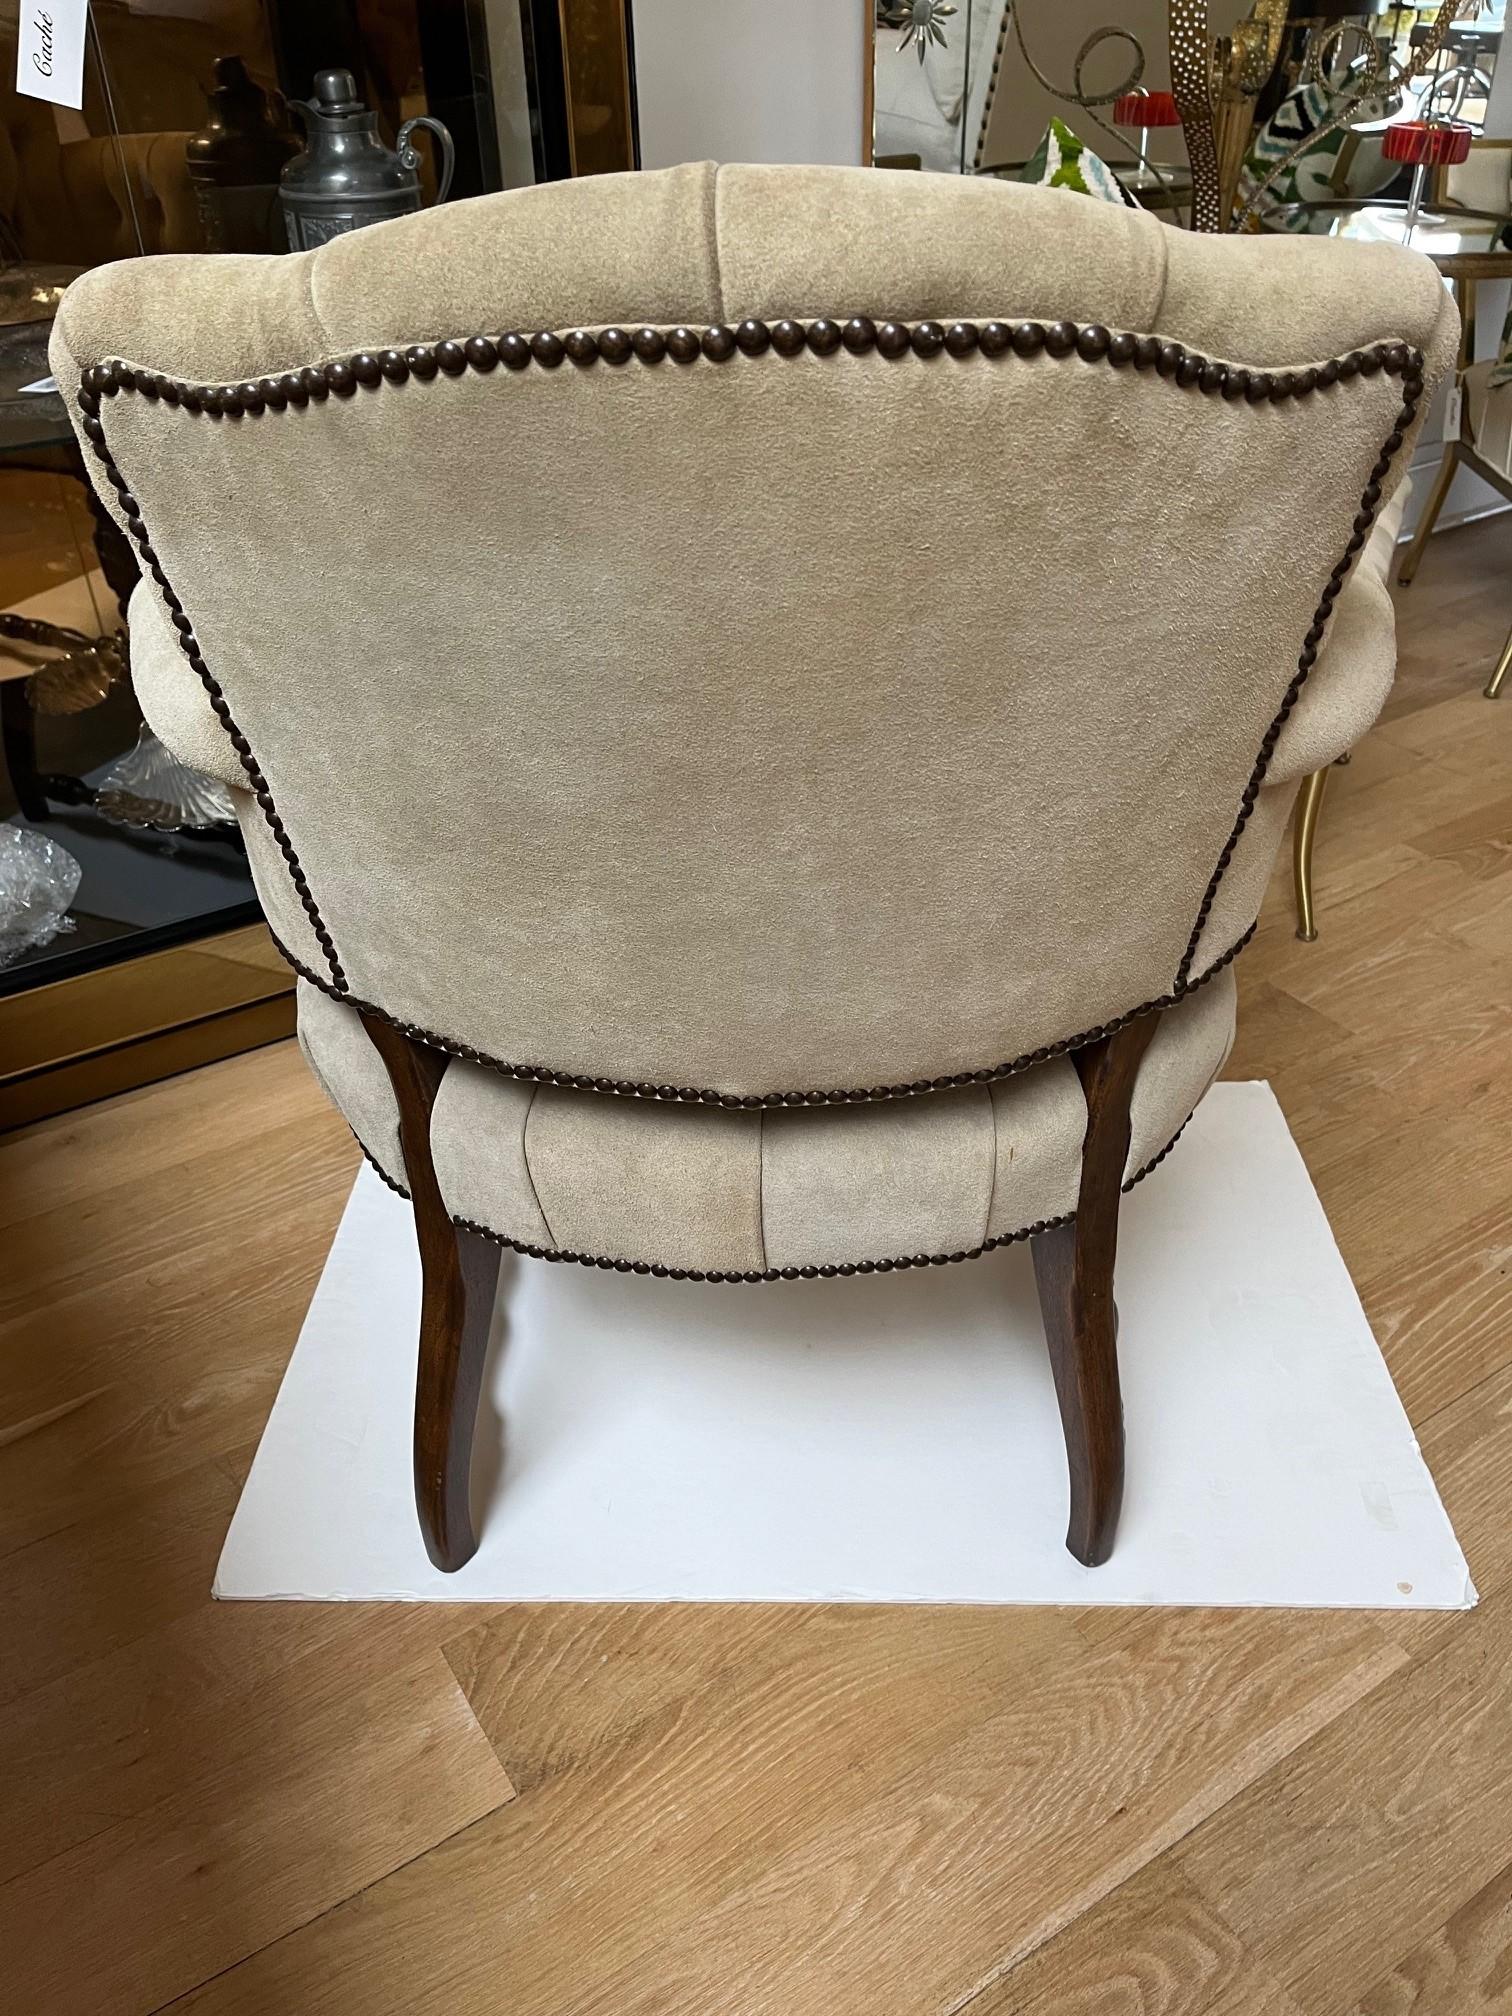 Contemporary Made to Order Elegant Tufted Seat and Back in Beige Suede Leather Seville Chair For Sale